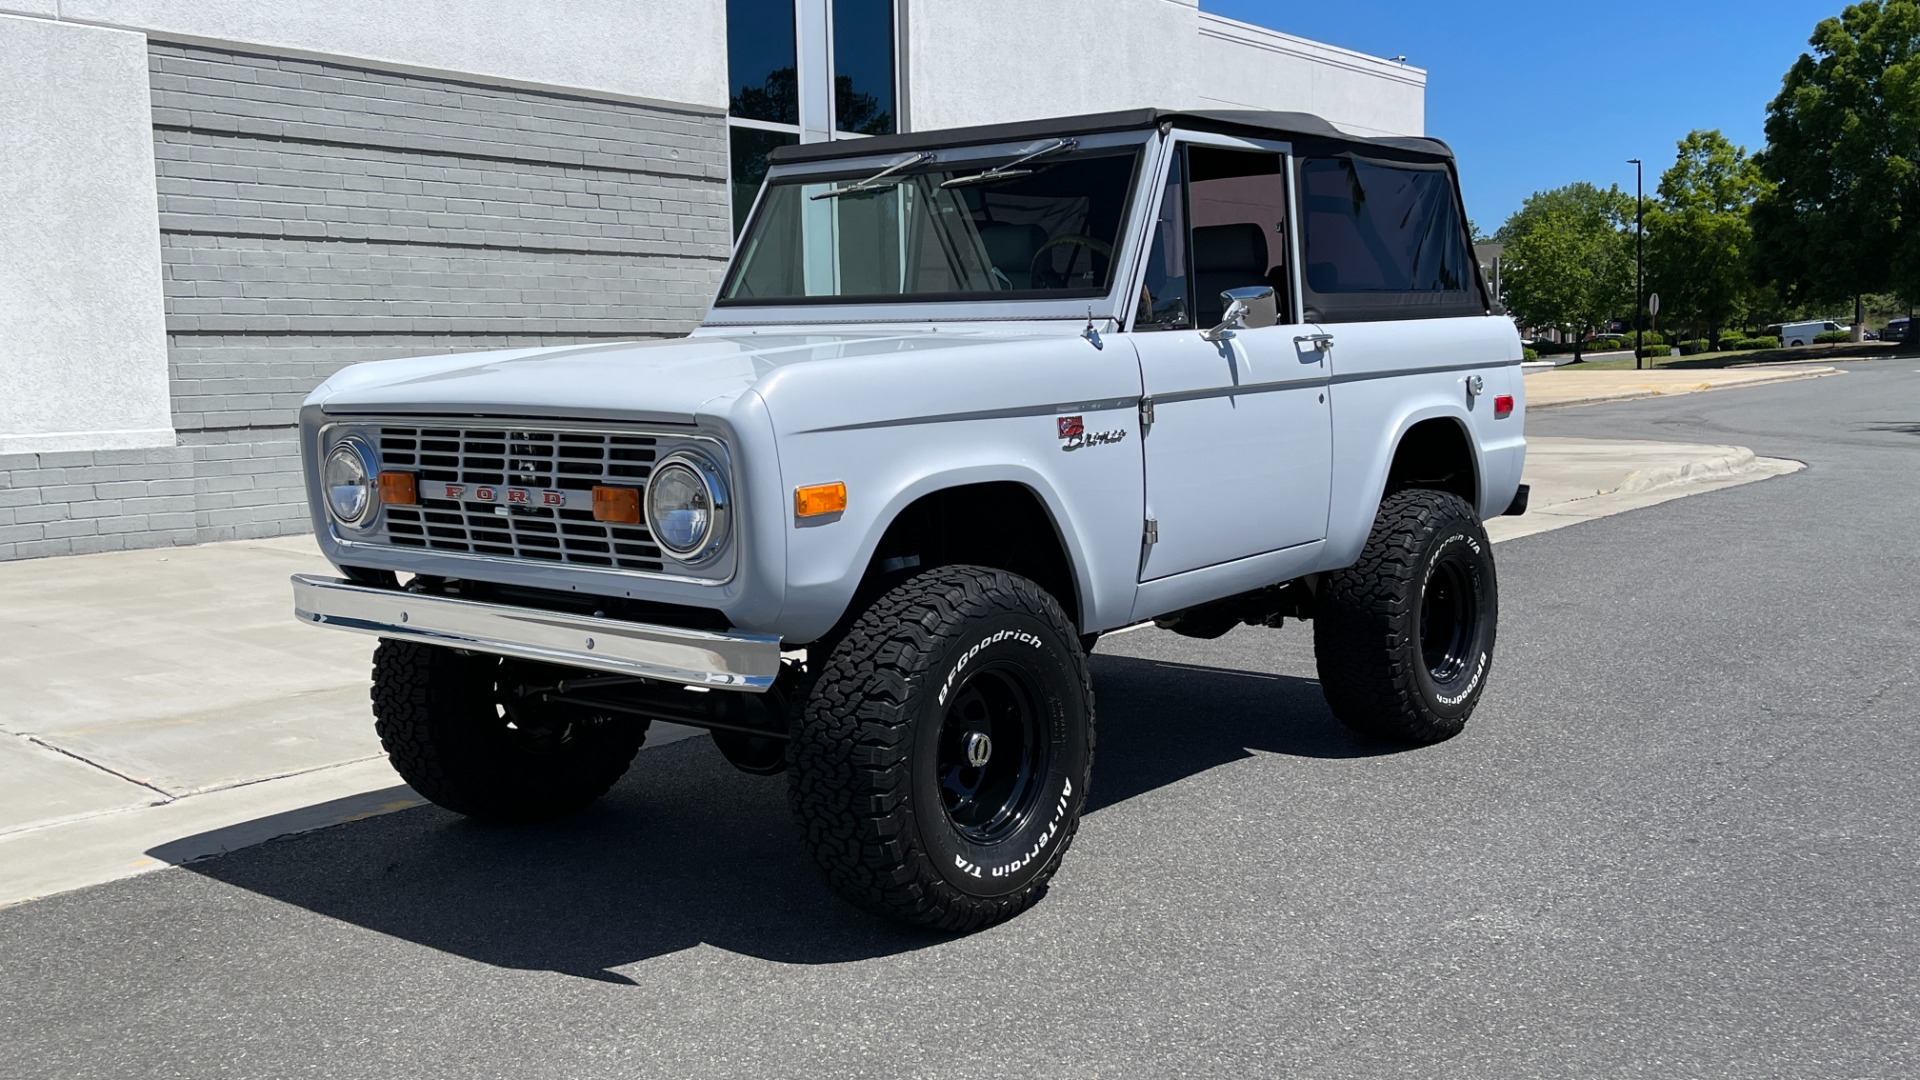 Used 1976 Ford BRONCO RESTO-MOD 4X4 / COYOTE 5.0L / AUTO / HTD STS / ALL NEW / LOW MILES for sale $239,999 at Formula Imports in Charlotte NC 28227 2